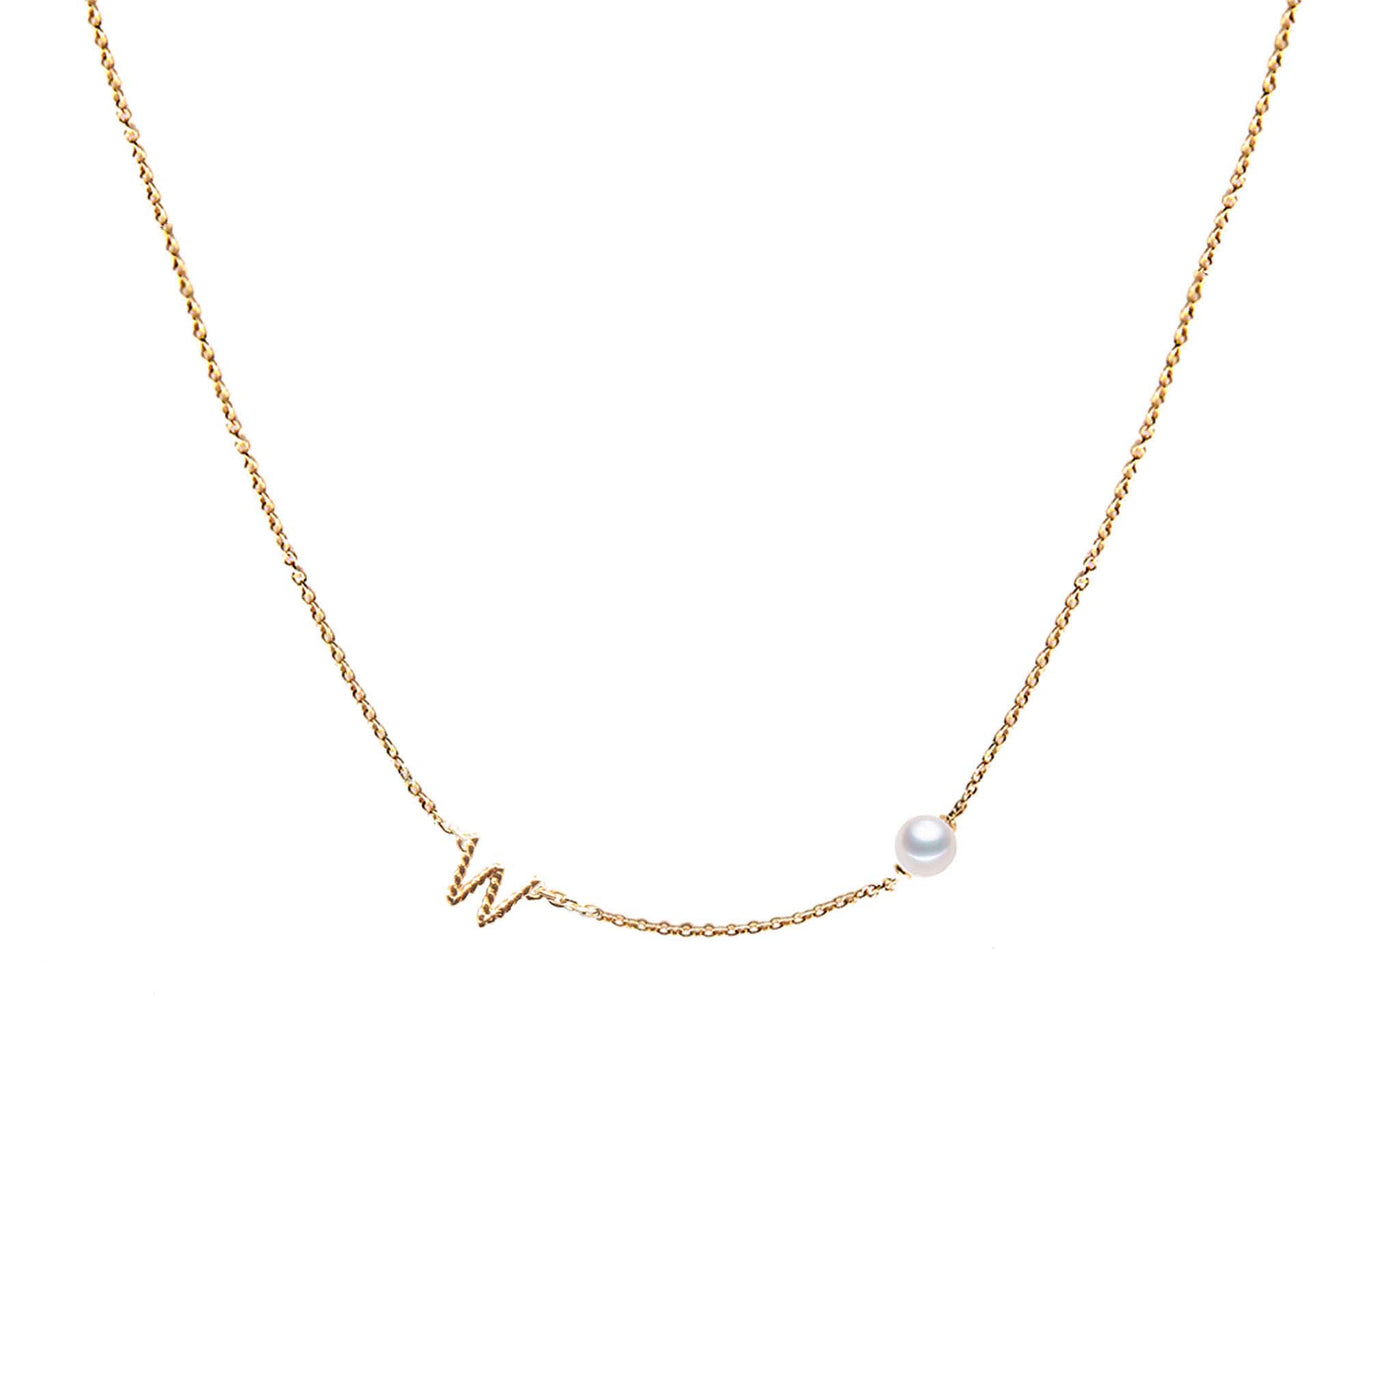 Initial Letter W Necklace